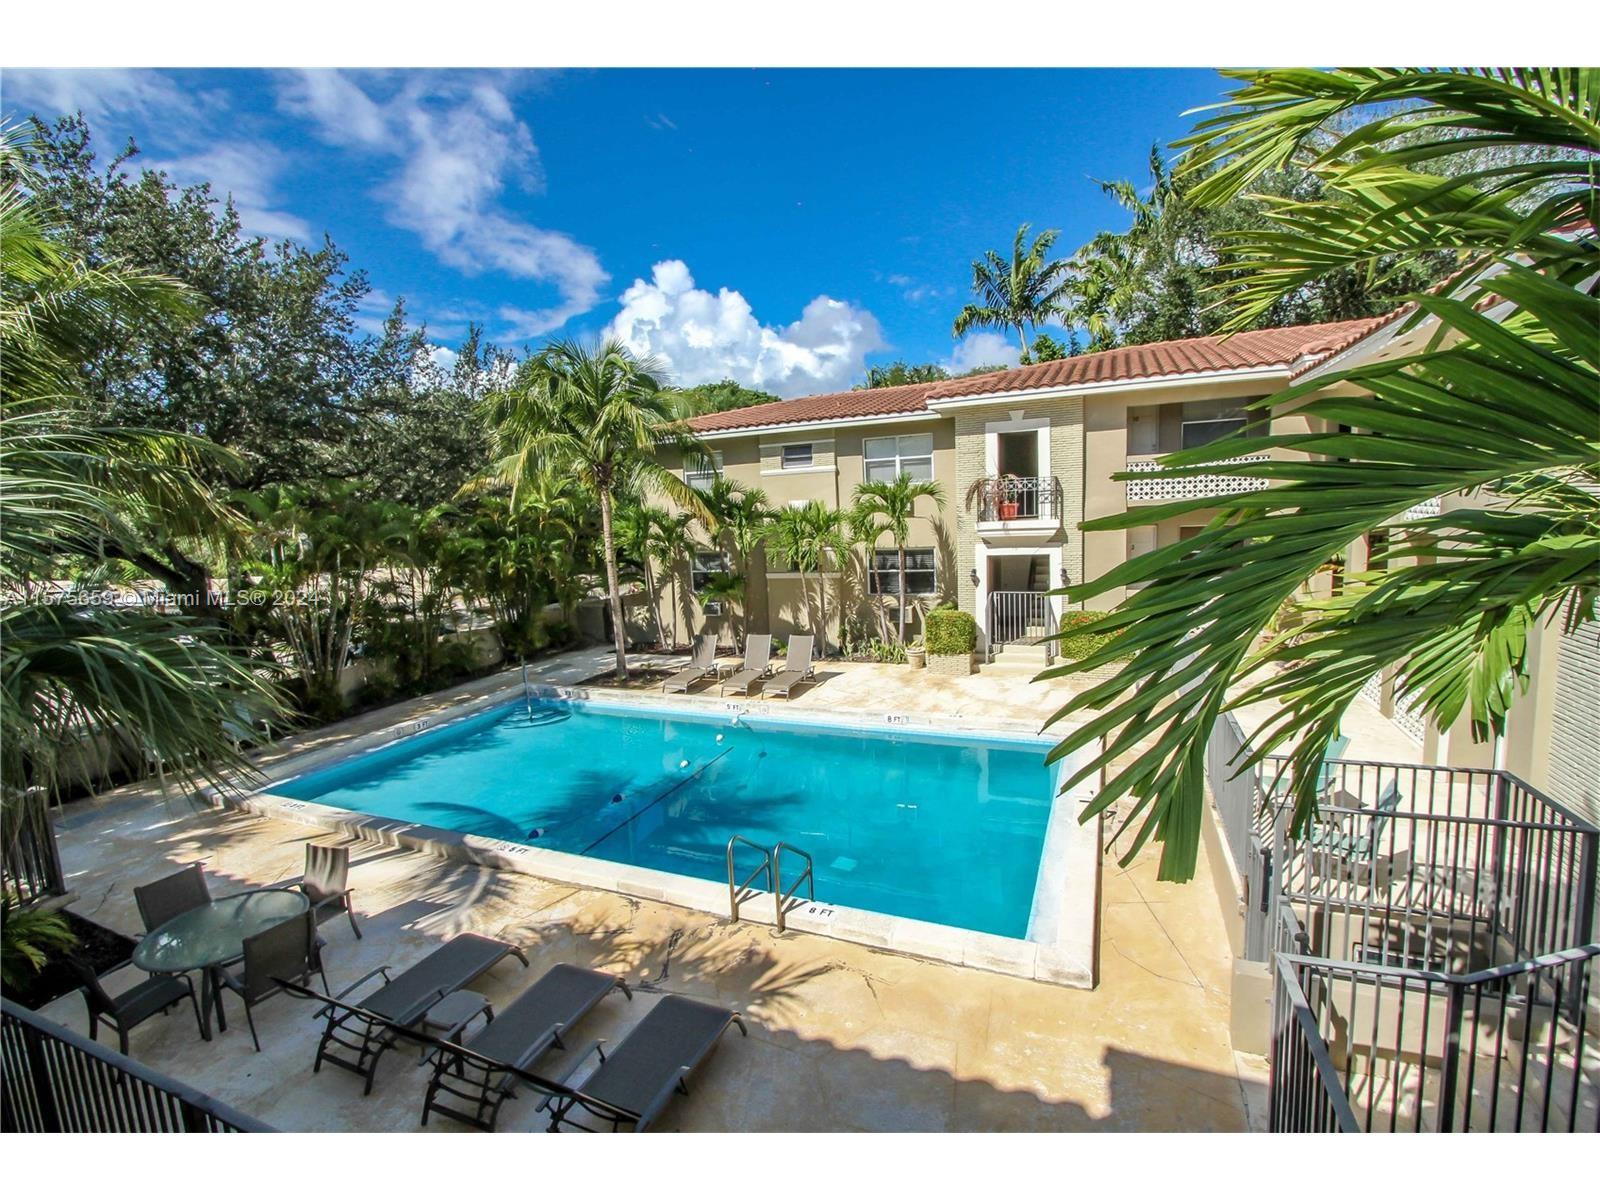 Charming Coral Gables large studio apartment located in desirable Edgewater/Sunset Harbour district. Spacious living area with wood floors. Gas kitchen stove, fridge and microwave. Impact windows throughout. Water included with on-site laundry. Beautiful tropical patio with BBQ and large community pool for relaxing. An exceptional opportunity to reside in this exquisite area near Ingraham Park and Cocoplum Circle by the Gables waterway. You can leisurely stroll along tree-lined streets or enjoy a quick bike ride for breakfast in the Grove. Close to University of Miami and downtown Coral Gables. Centrally located! 1 assigned parking spot. Fast Approval. Call today to schedule a showing. Your ideal home is ready to welcome you!